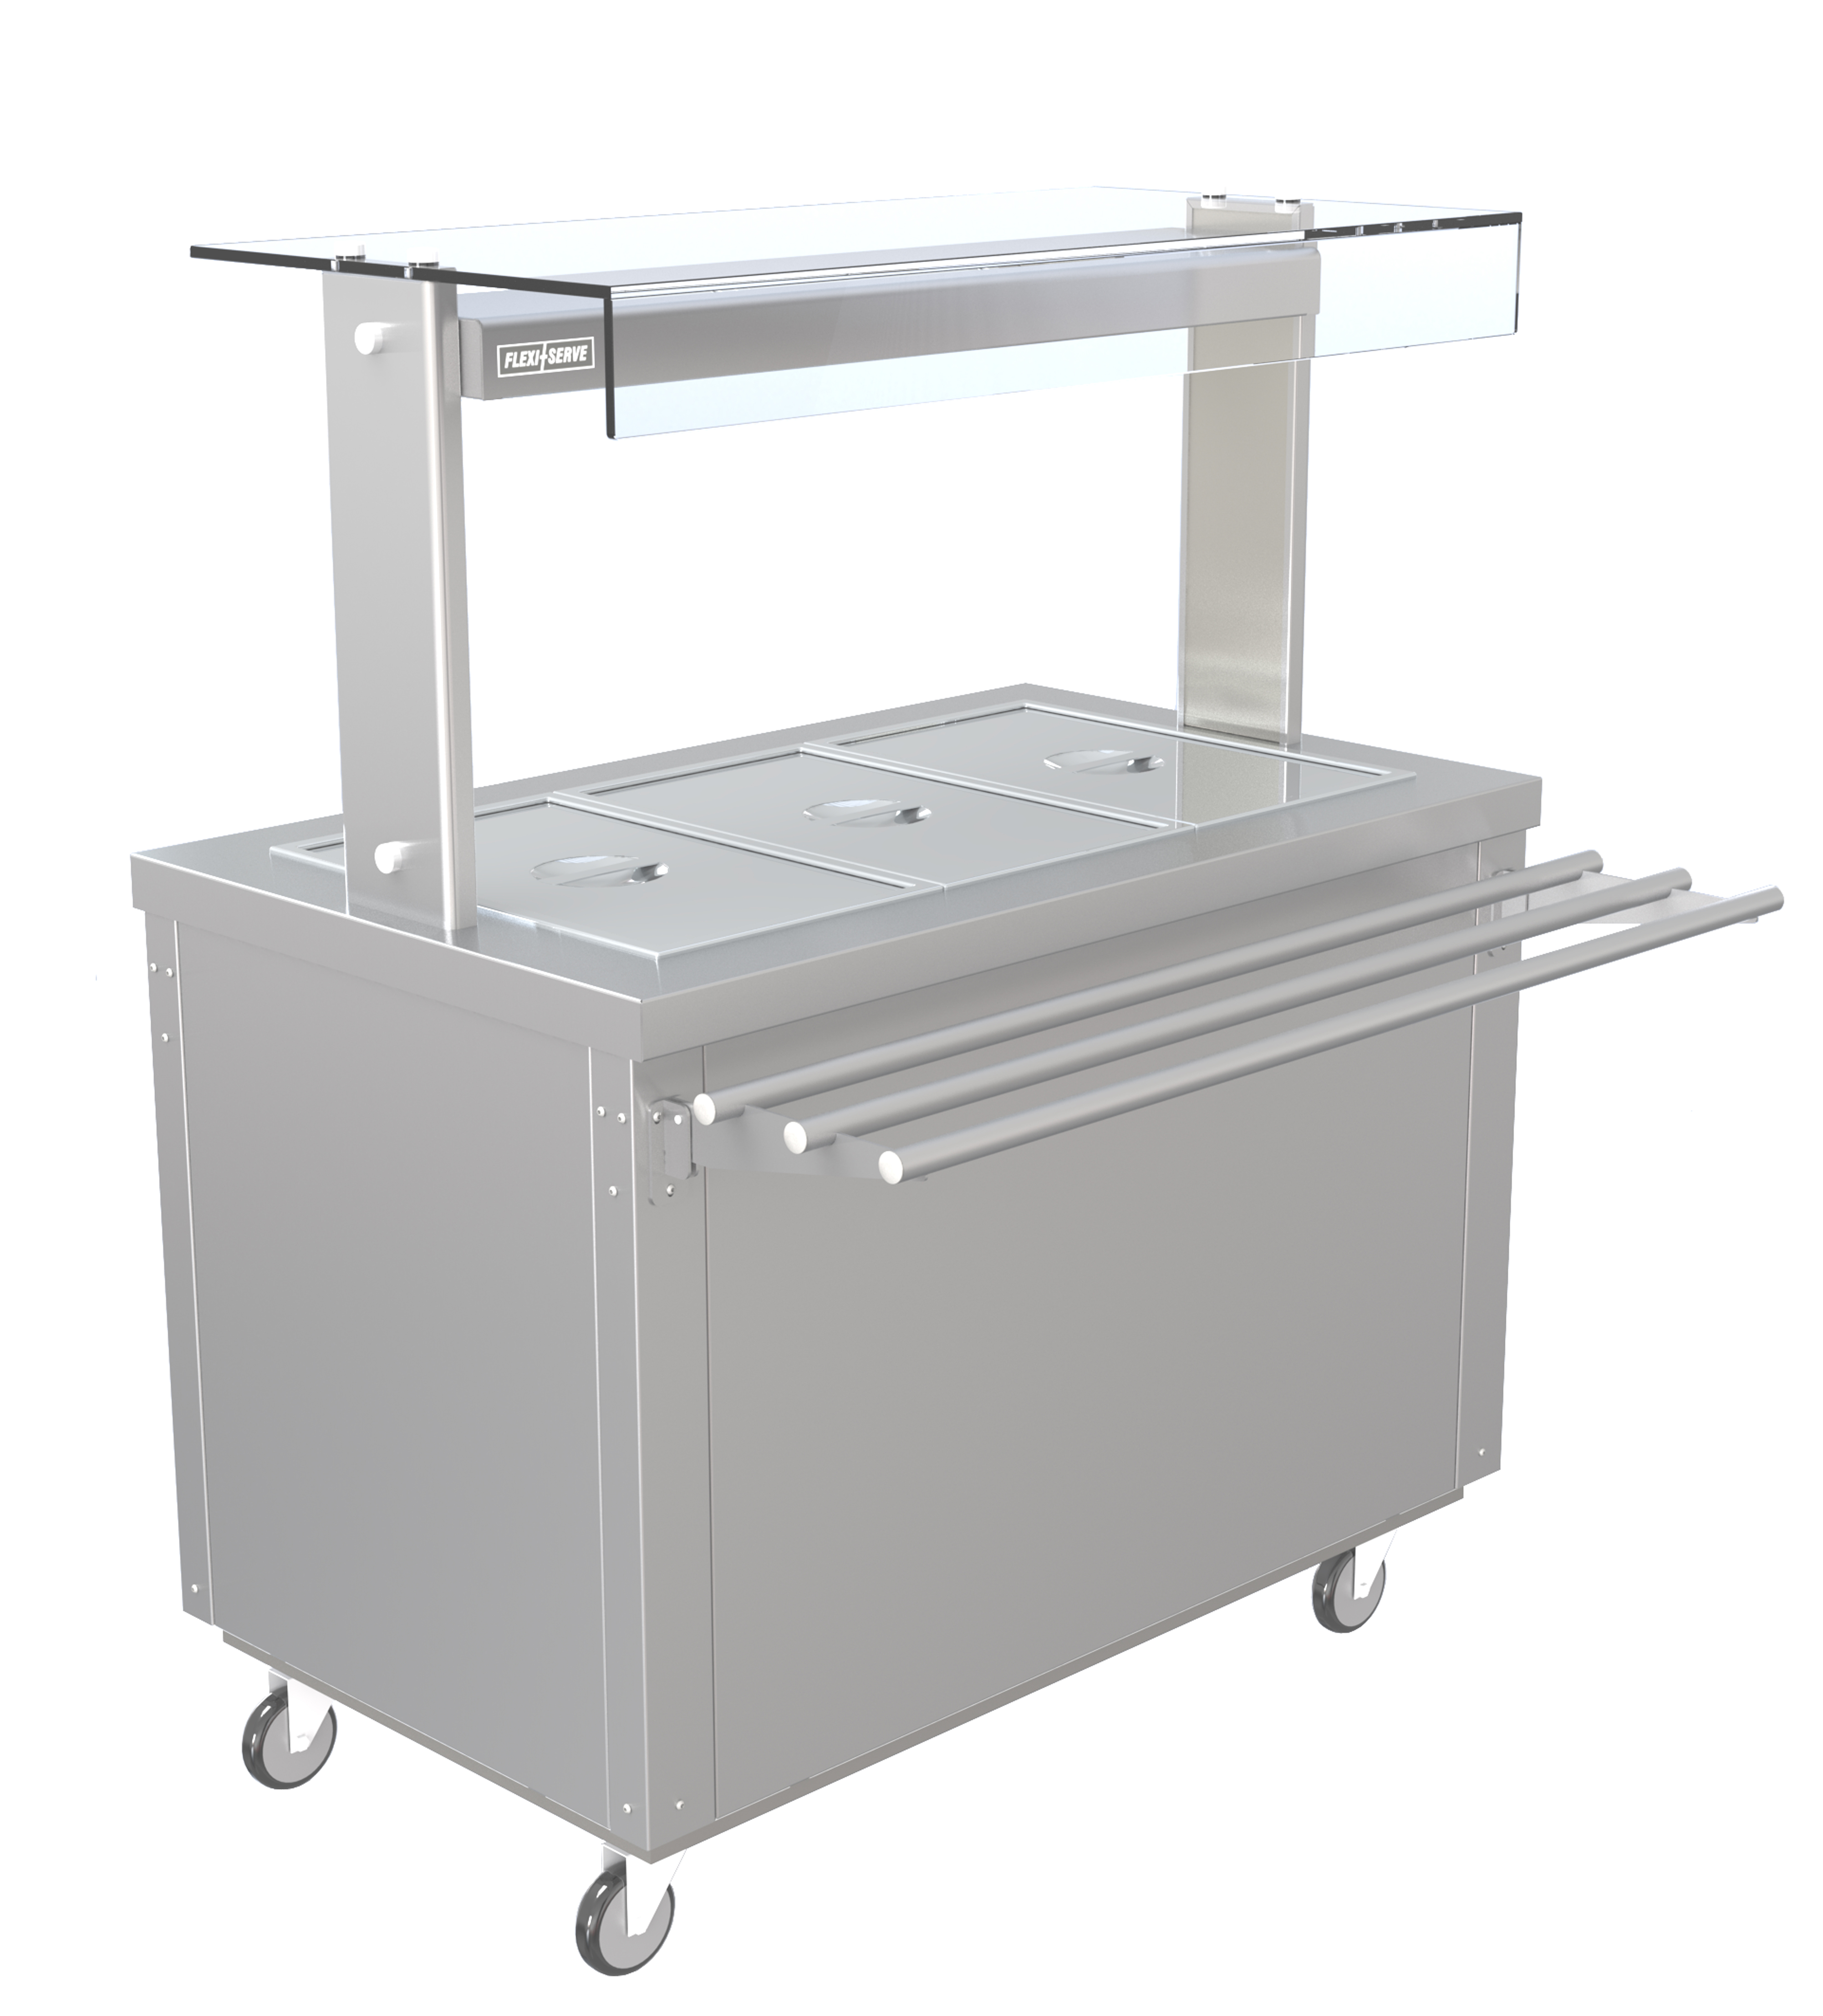 Parry FS-HB5 - Flexi Serve Hot Cupboard with Dry Well Bain Marie